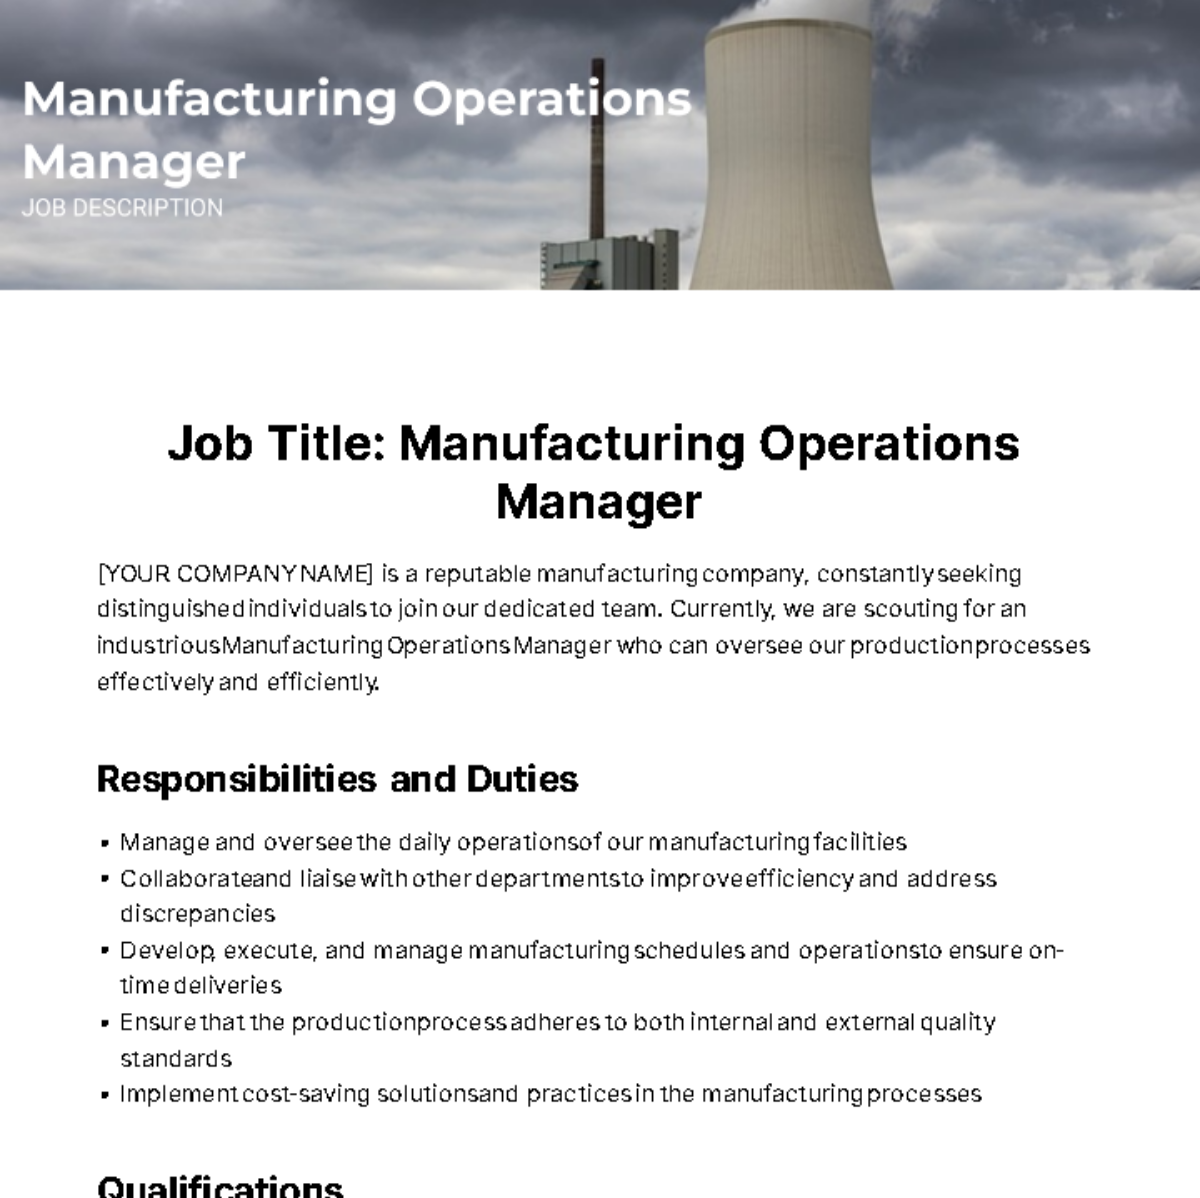 Manufacturing Operations Manager Job Description Template